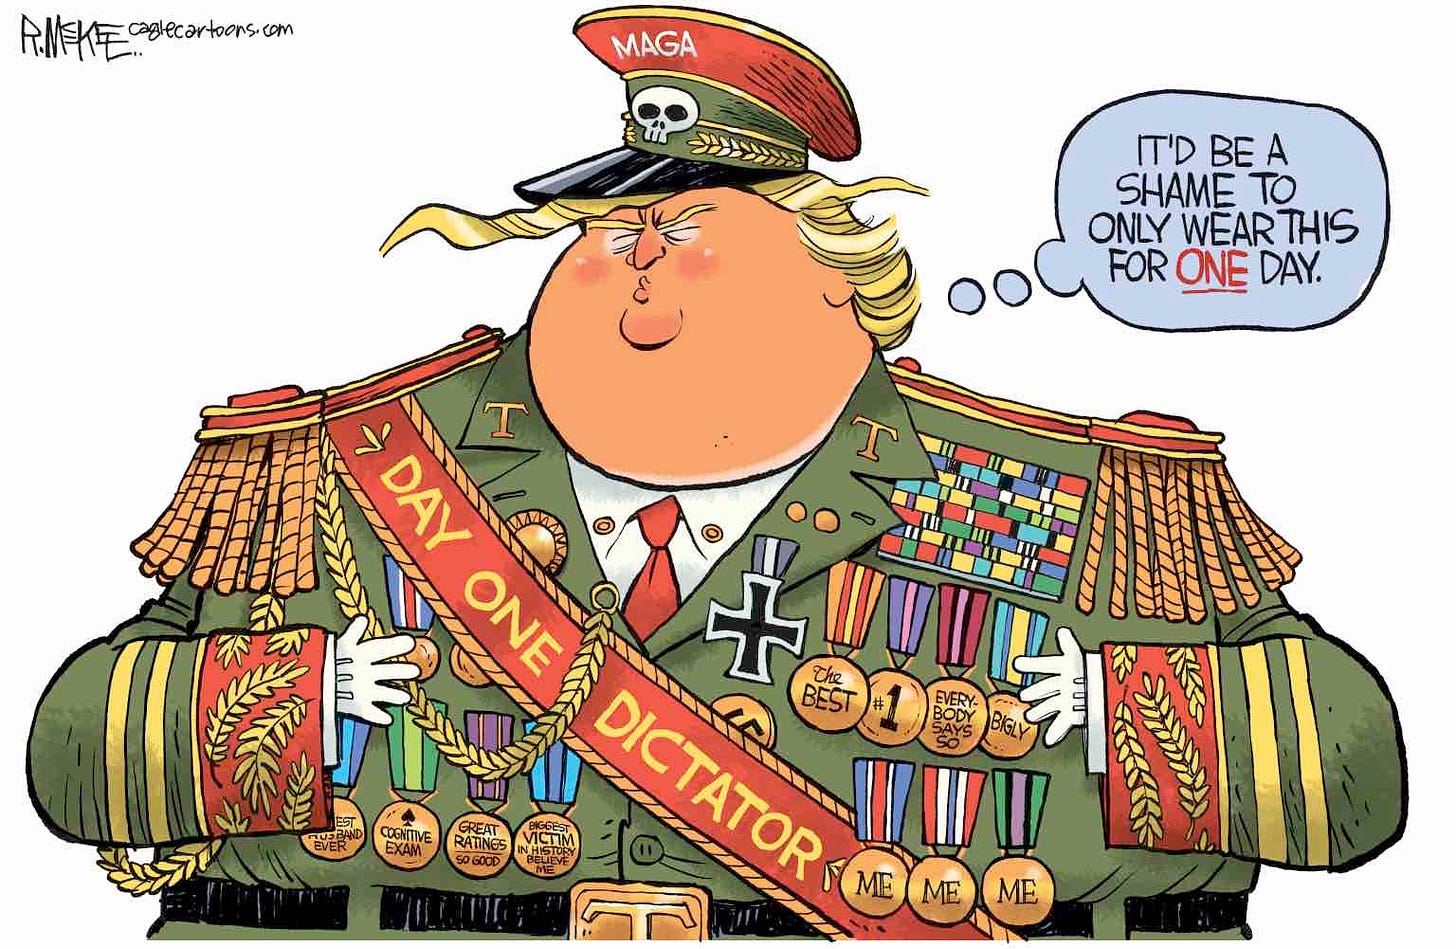 Trump plans to be a dictator from Day One